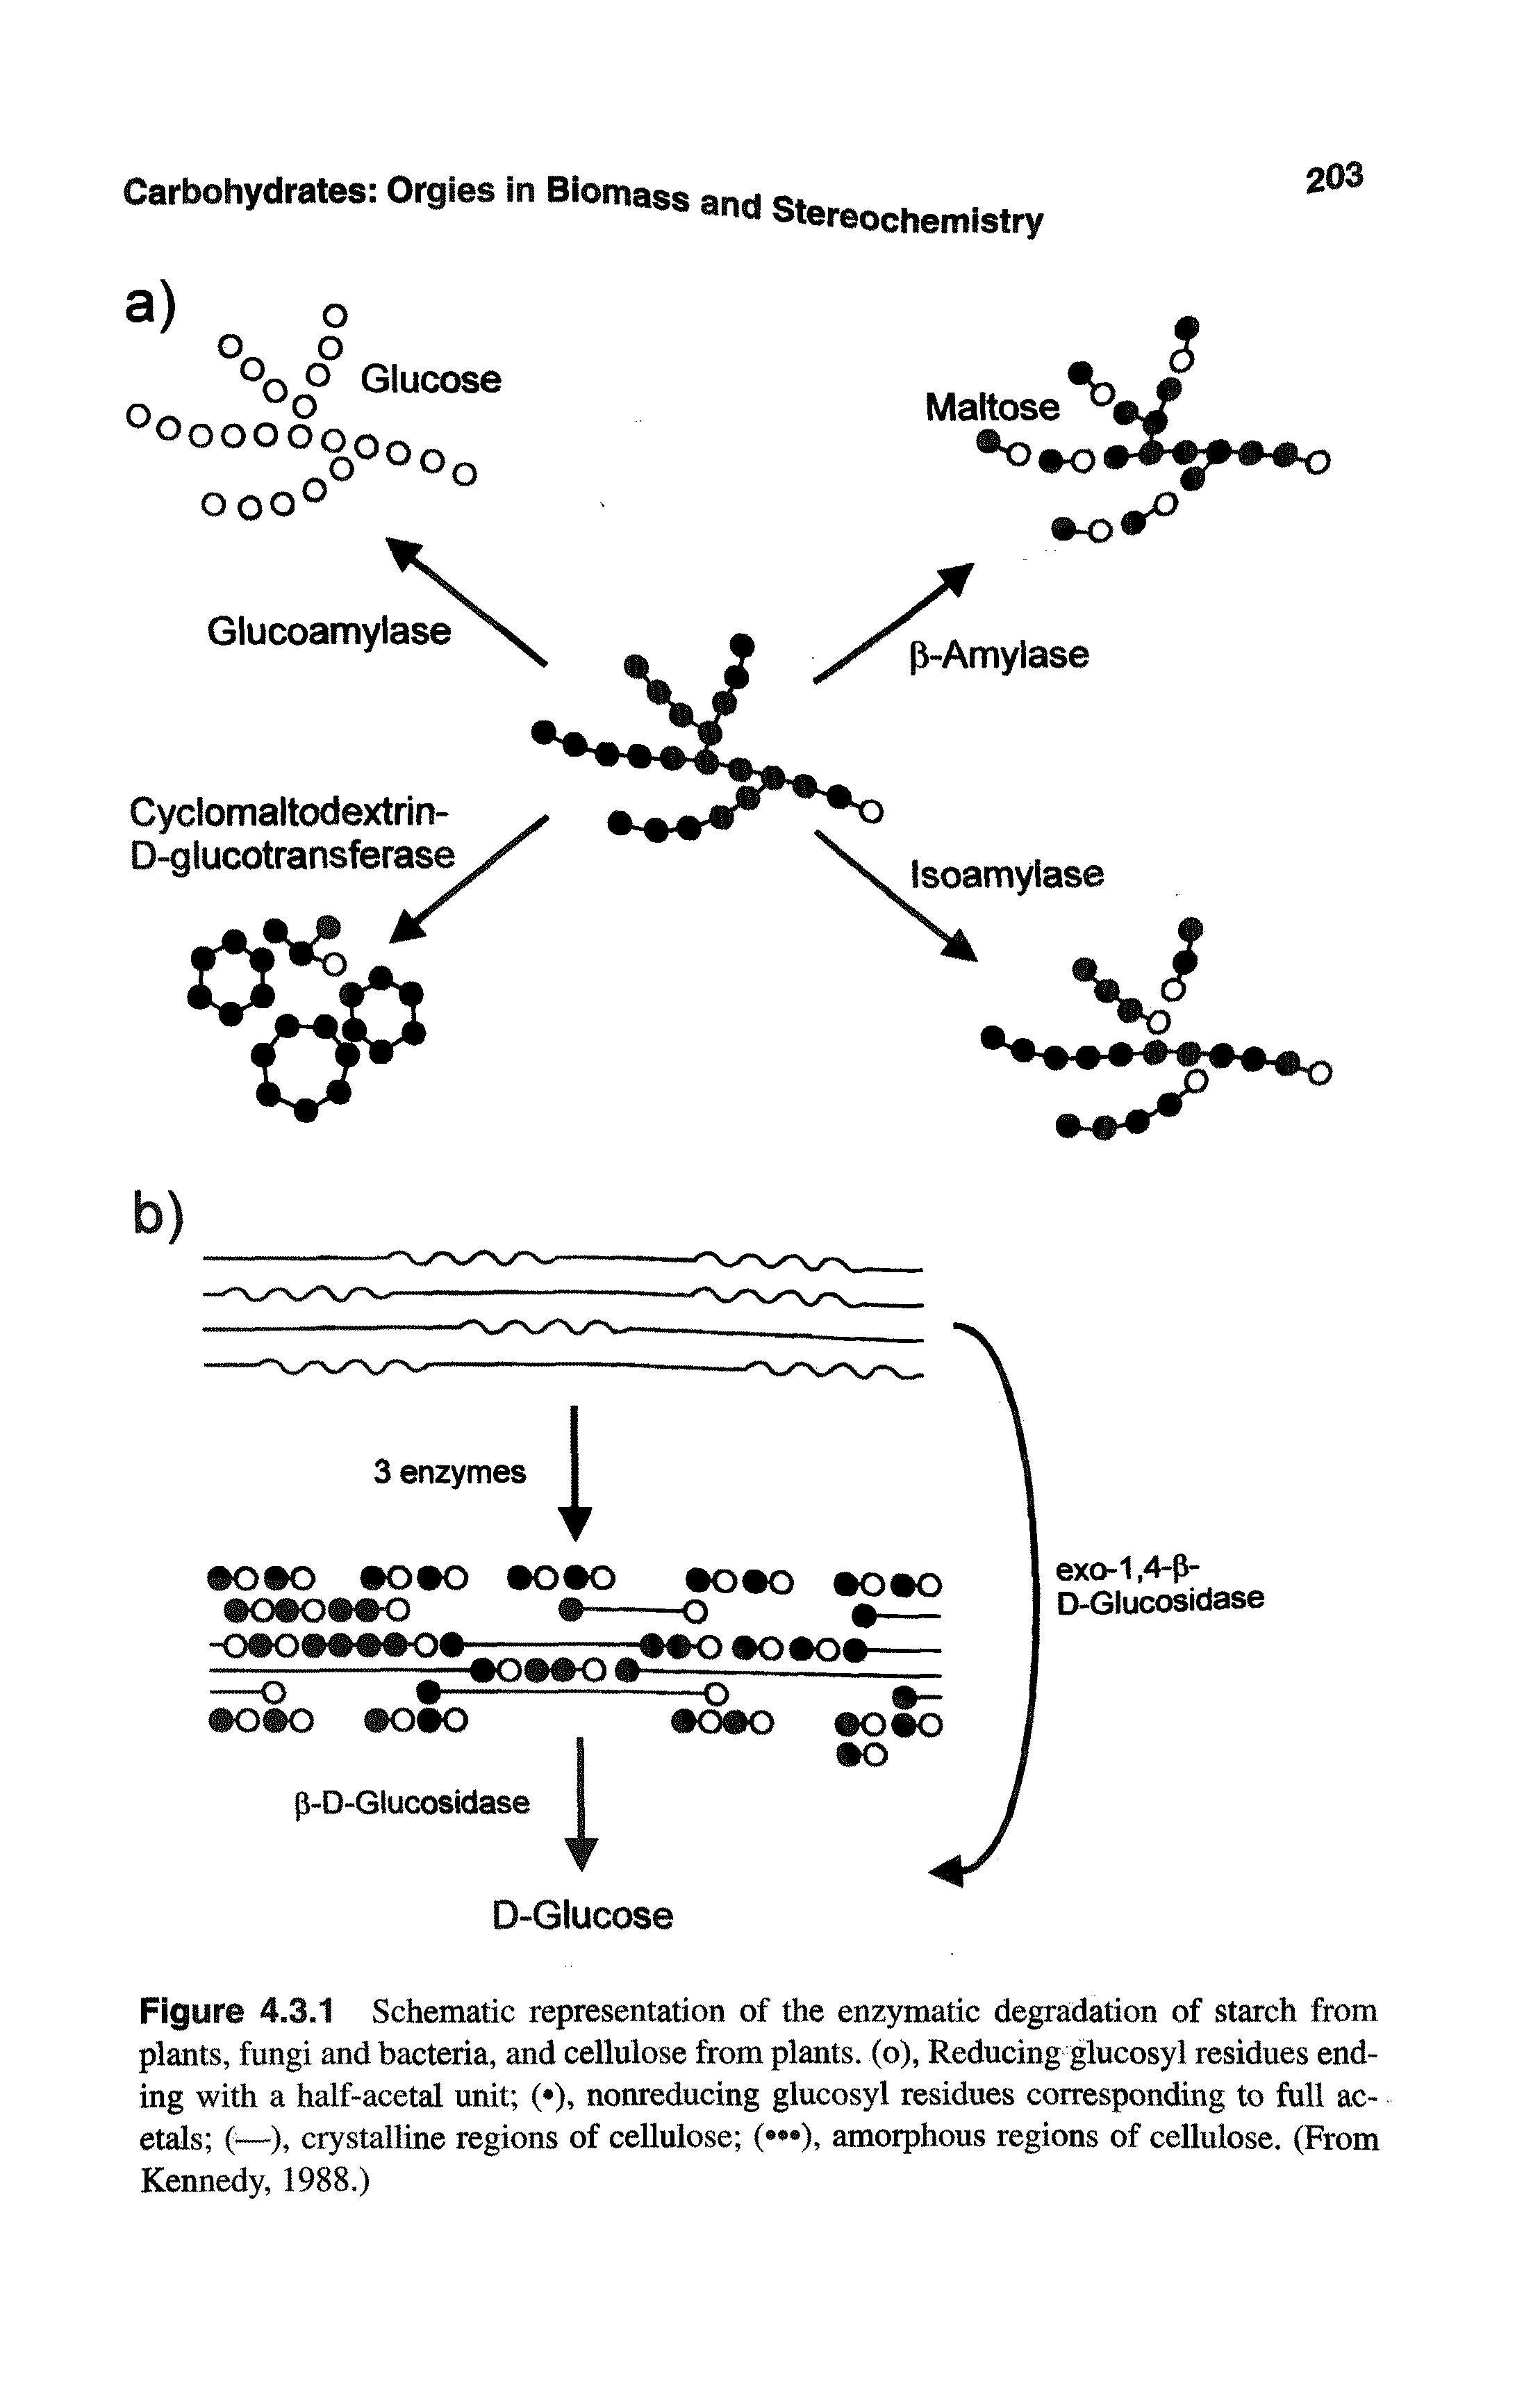 Figure 4.3.1 Schematic representation of the enzymatic degradation of starch from plants, fungi and bacteria, and cellulose from plants, (o), Reducing glucosyl residues ending with a half-acetal unit ( ), nonreducing glucosyl residues corresponding to full ac-etals f—), crystalline regions of cellulose ( ), amorphous regions of cellulose. (From Kennedy, 1988.)...